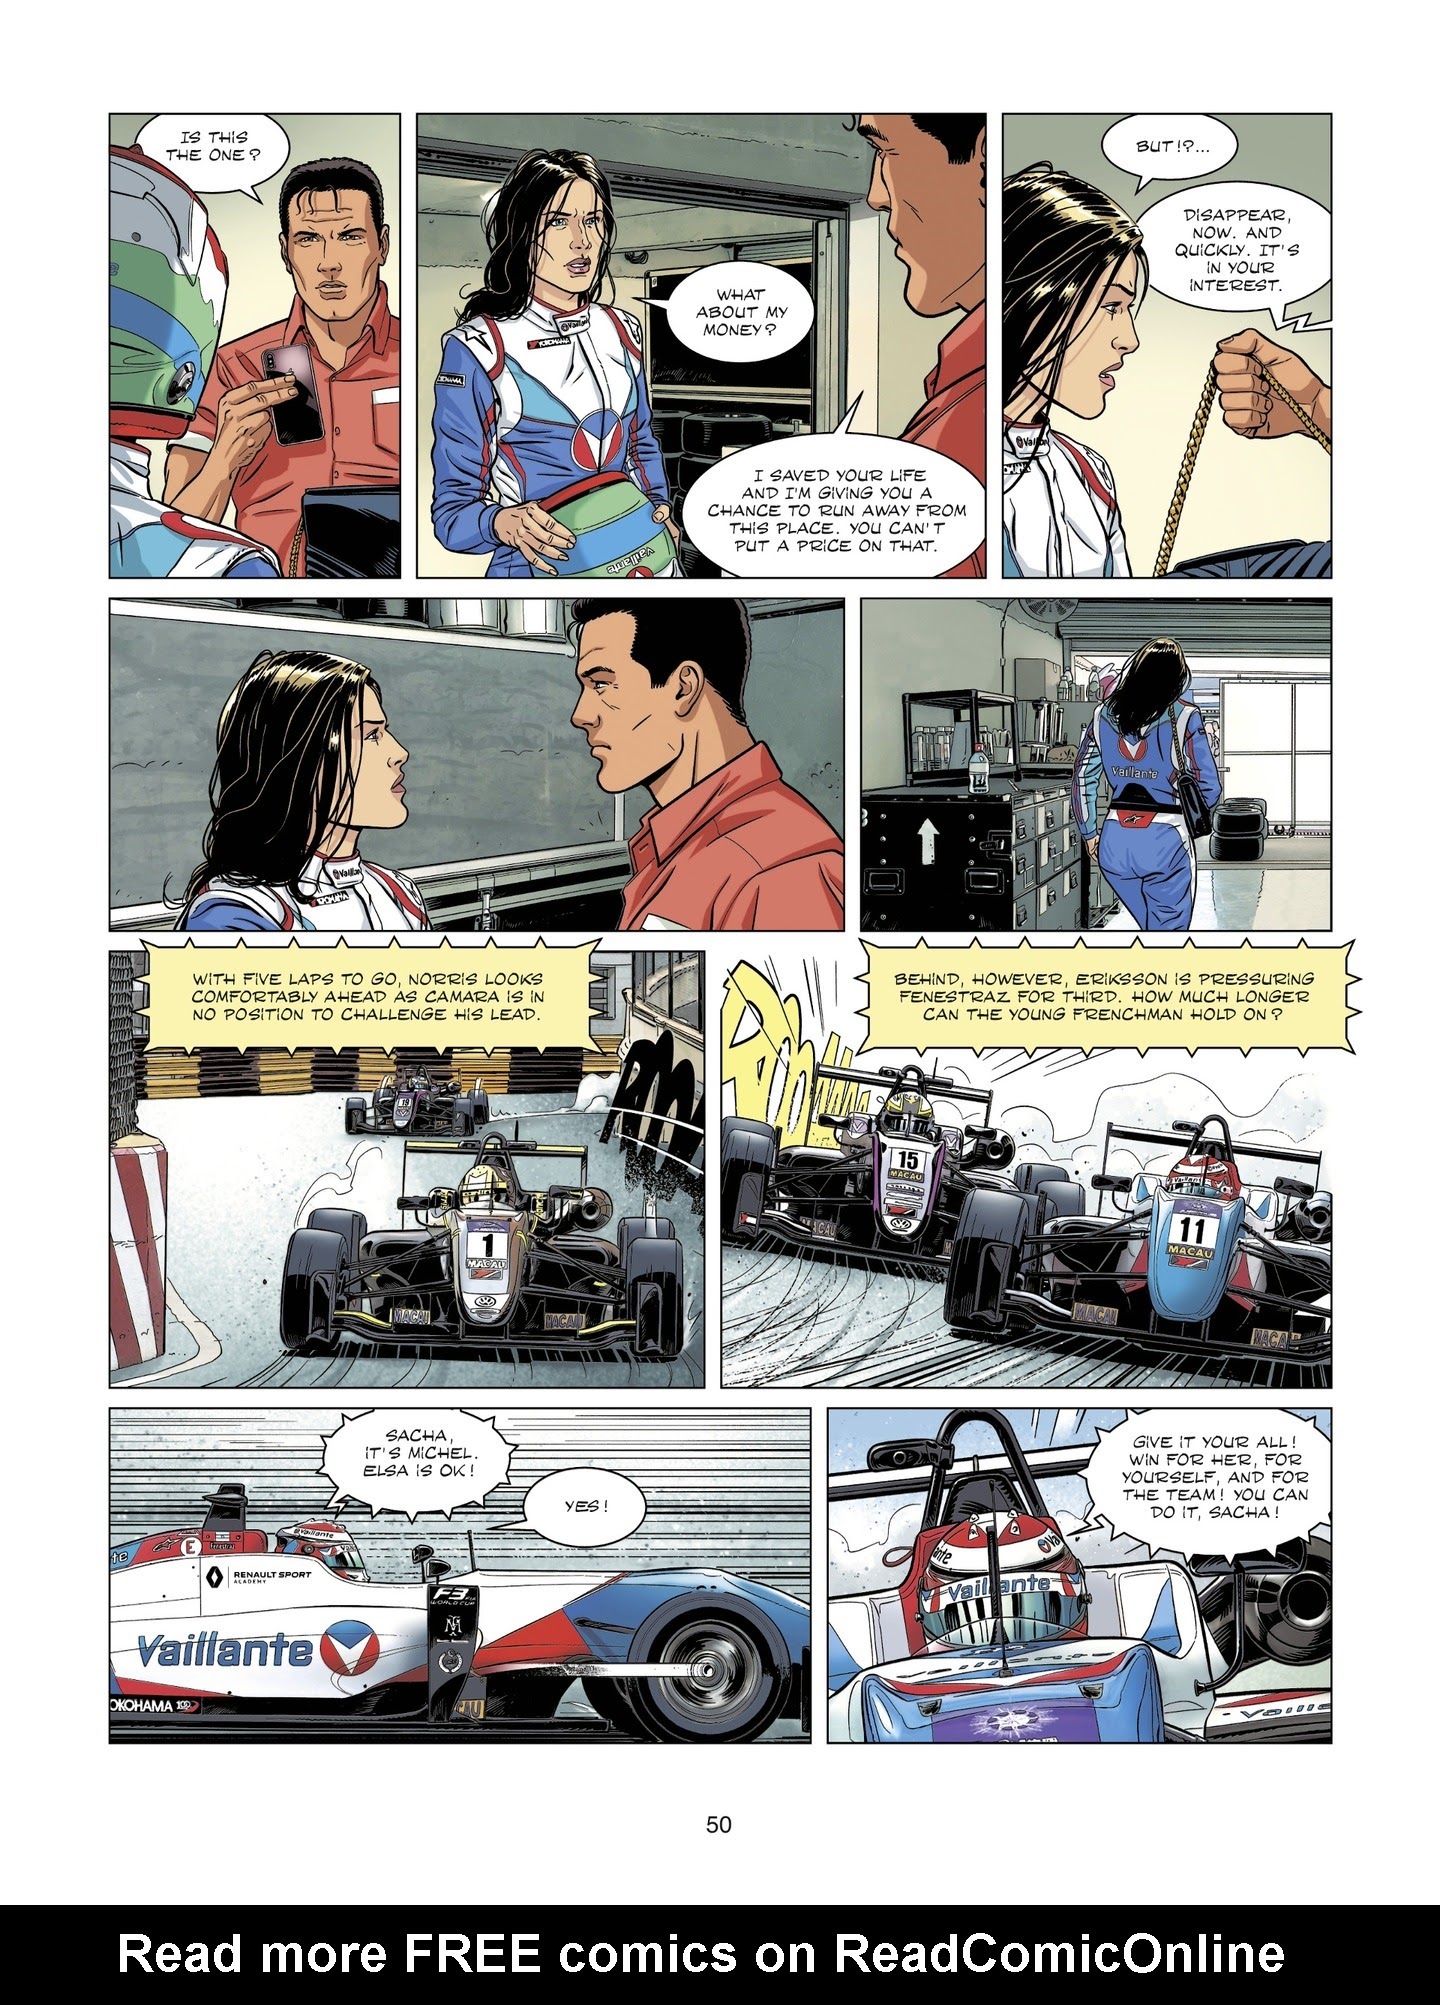 Read online Michel Vaillant comic -  Issue #7 - 50